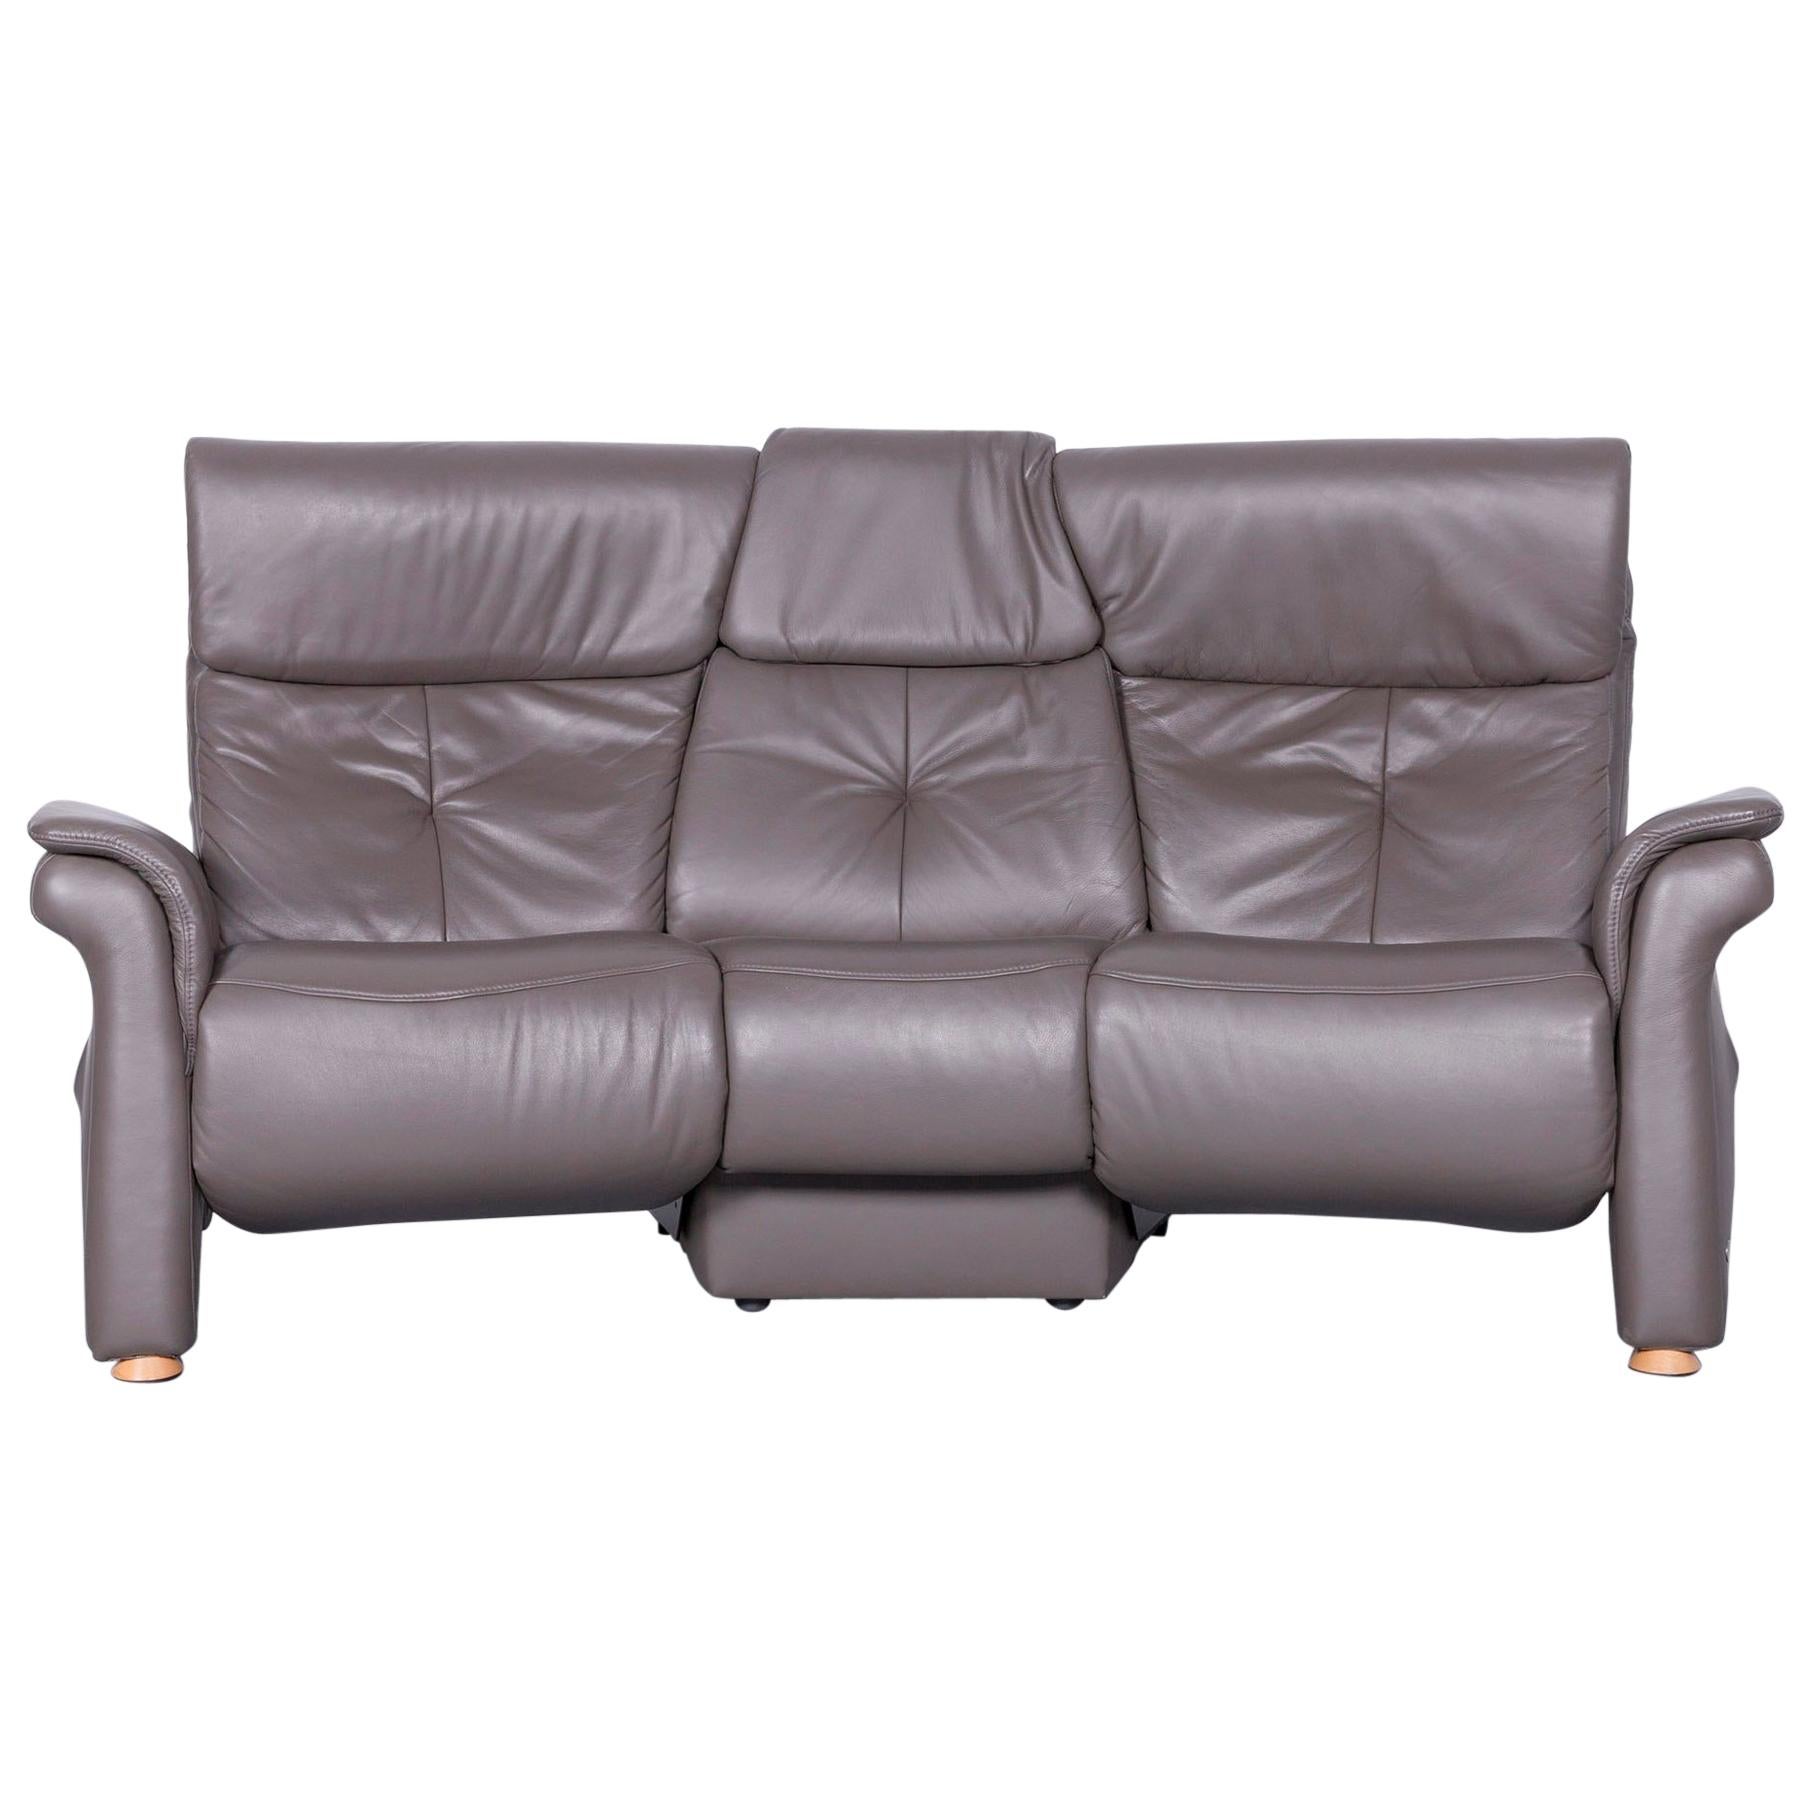 Himolla Designer Leather Sofa Grey Three-Seat Couch Recliner